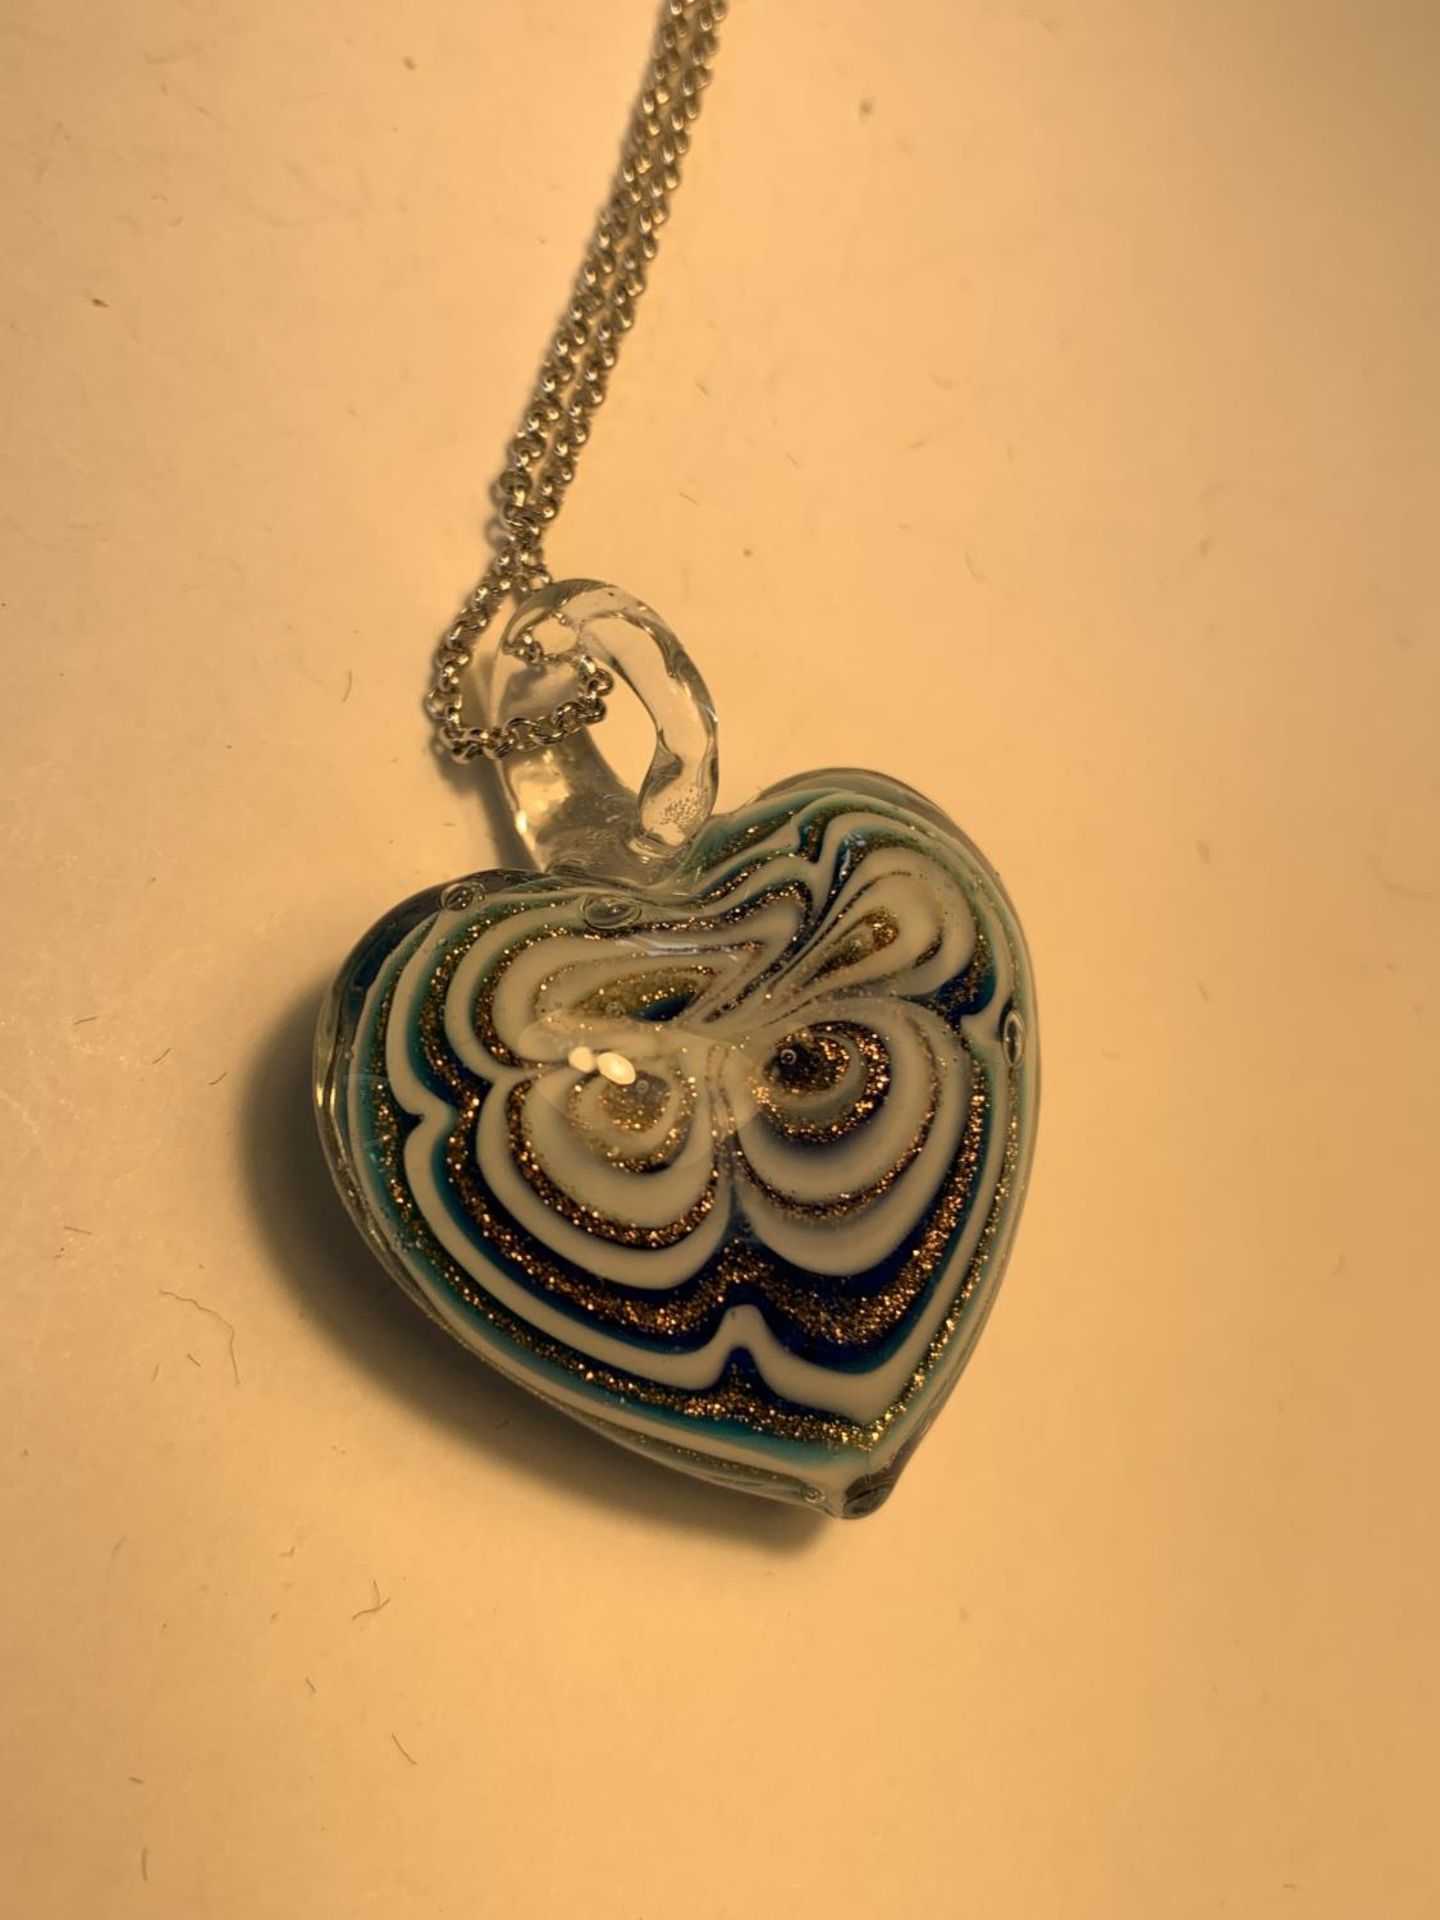 A MURANO GLASS HEART PENDANT ON A SILVER NECKLACE - Image 3 of 5